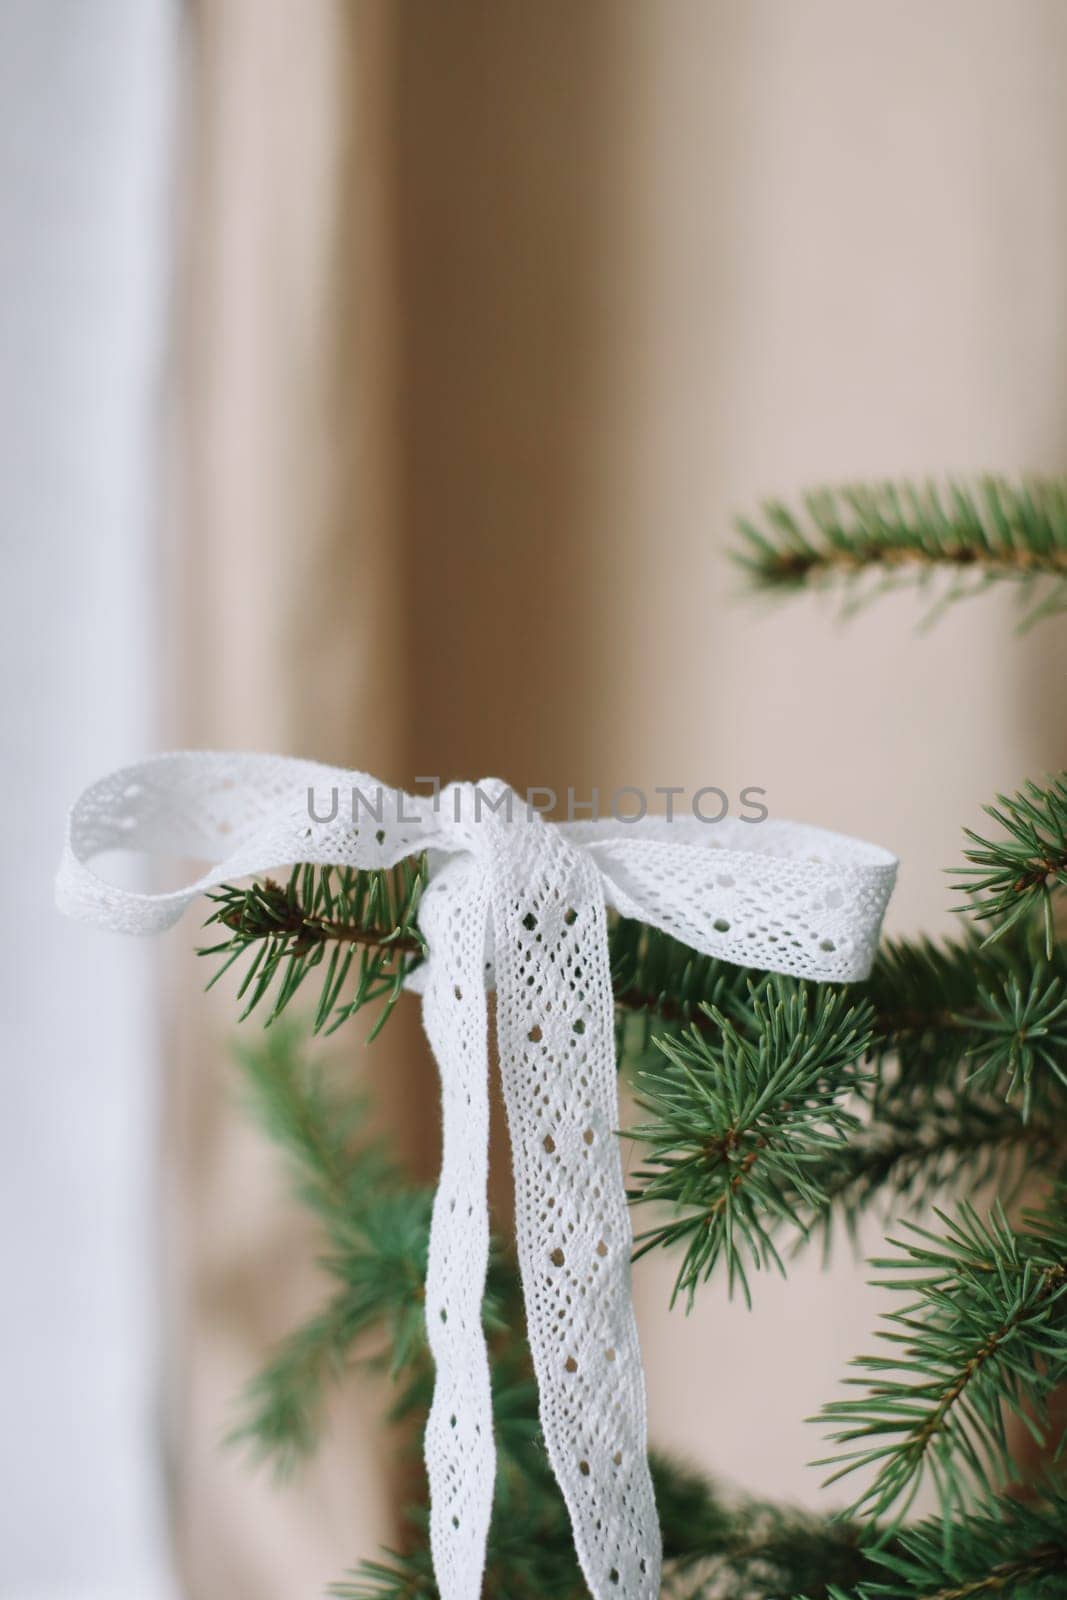 New Year lace decorations for the Christmas tree in eco style. Zero Waste Christmas concept. Vintage Christmas tree decorations